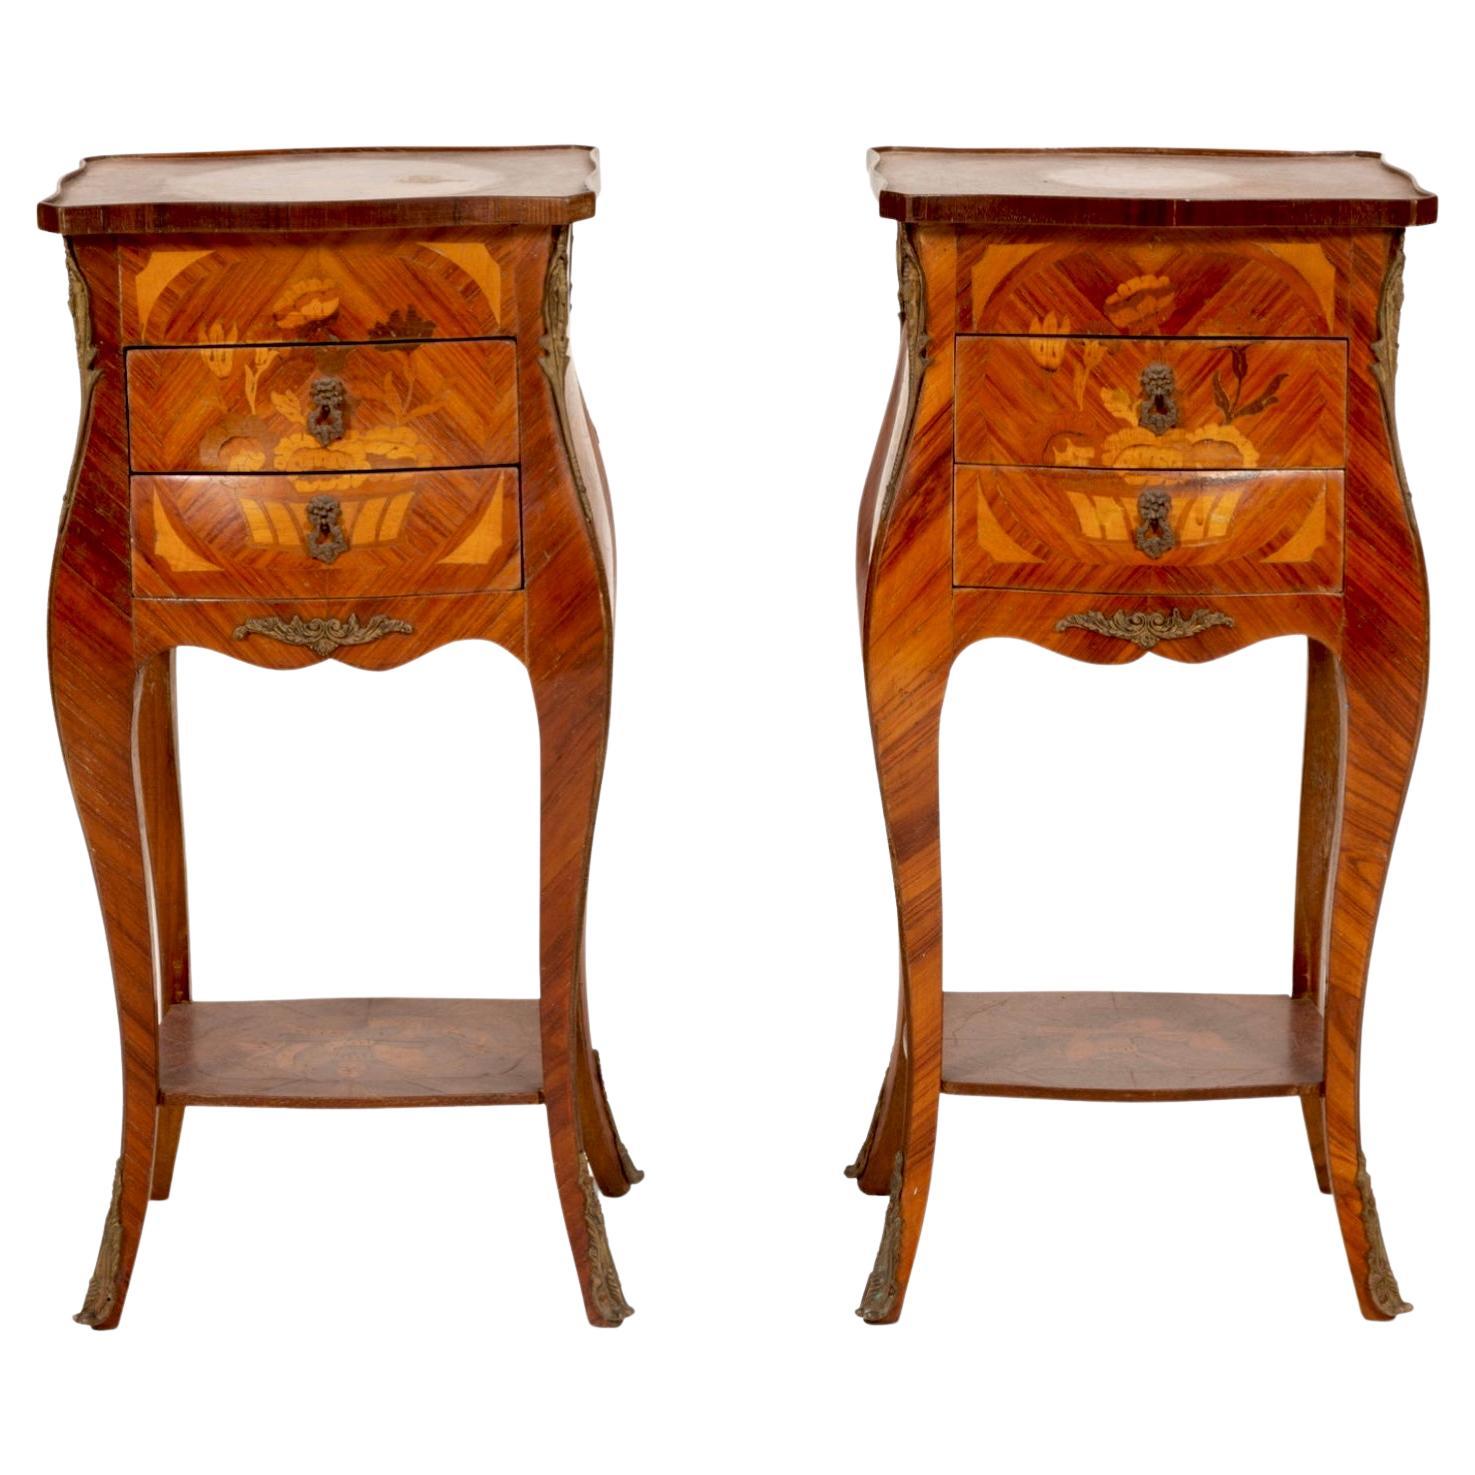 https://a.1stdibscdn.com/a-pair-of-marquetry-side-tables-with-gilt-metal-mounts-for-sale/f_60672/f_341843721683563036735/f_34184372_1683563037330_bg_processed.jpg